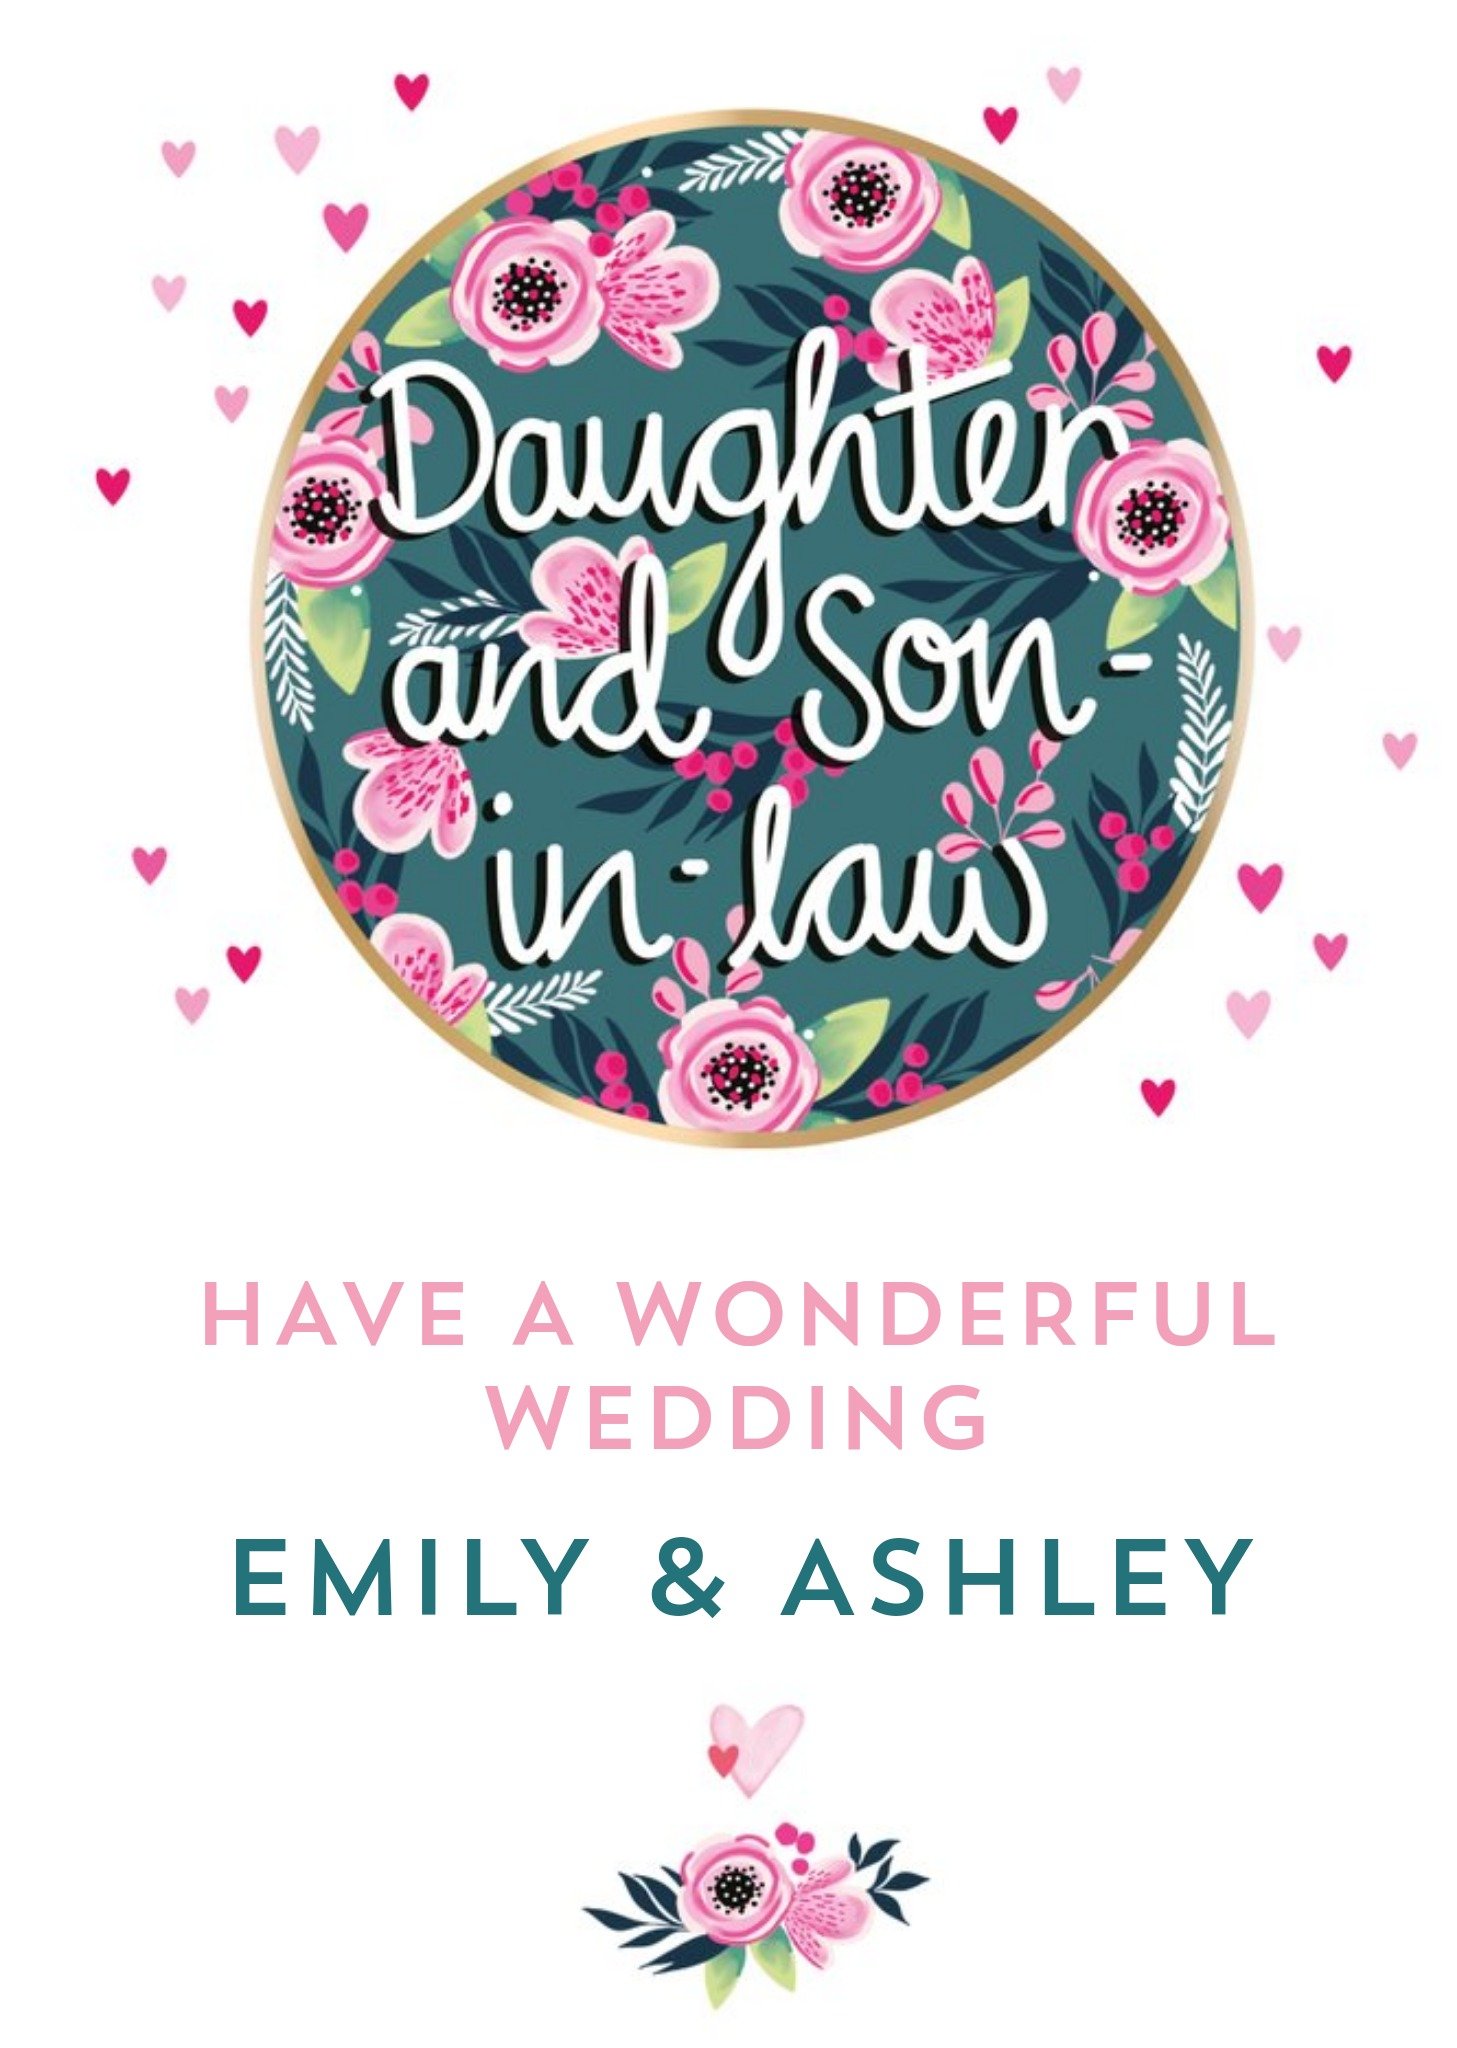 Ling Design Floral Wedding Card For Daughter And Son-In-Law Ecard